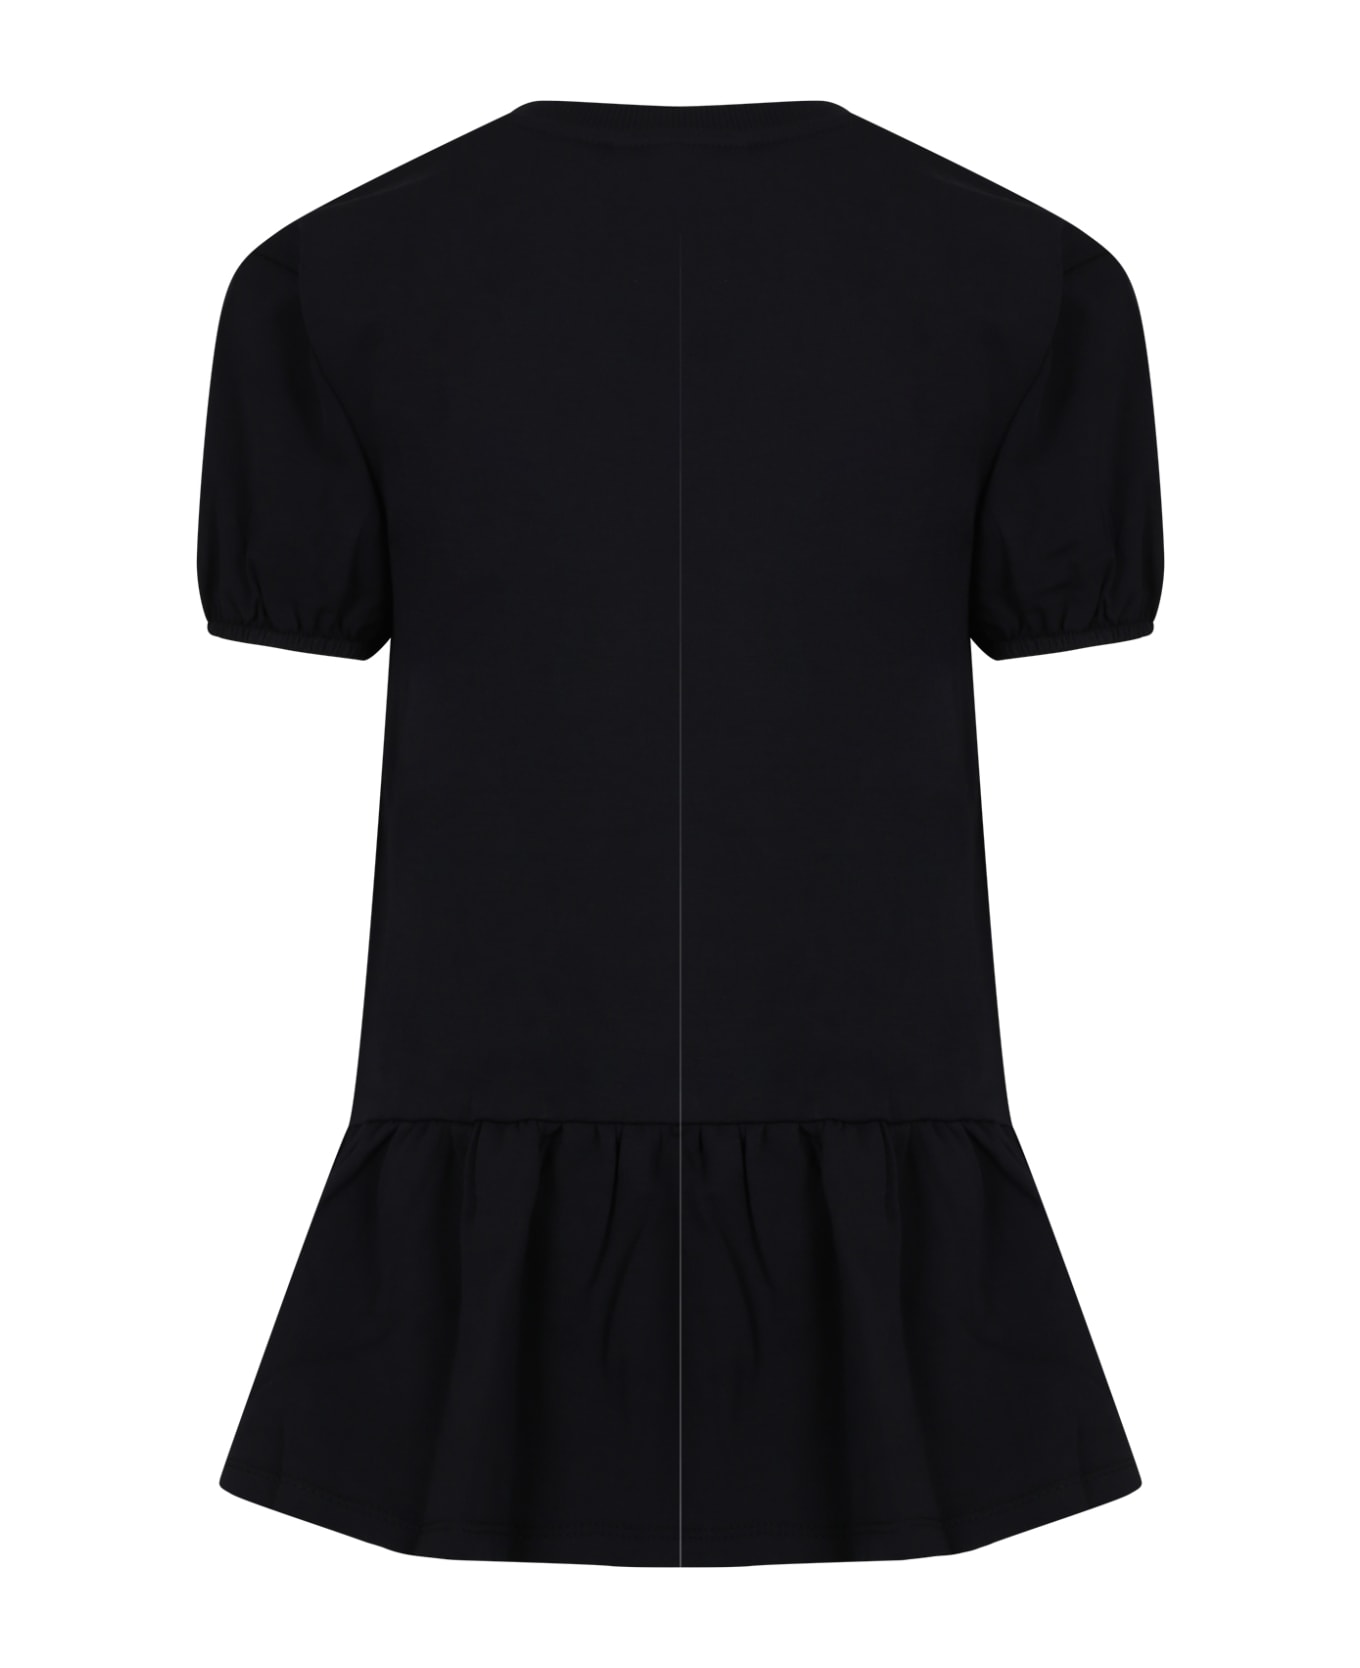 Moschino Black Dress For Girl With Teddy Bear And Logo - Black